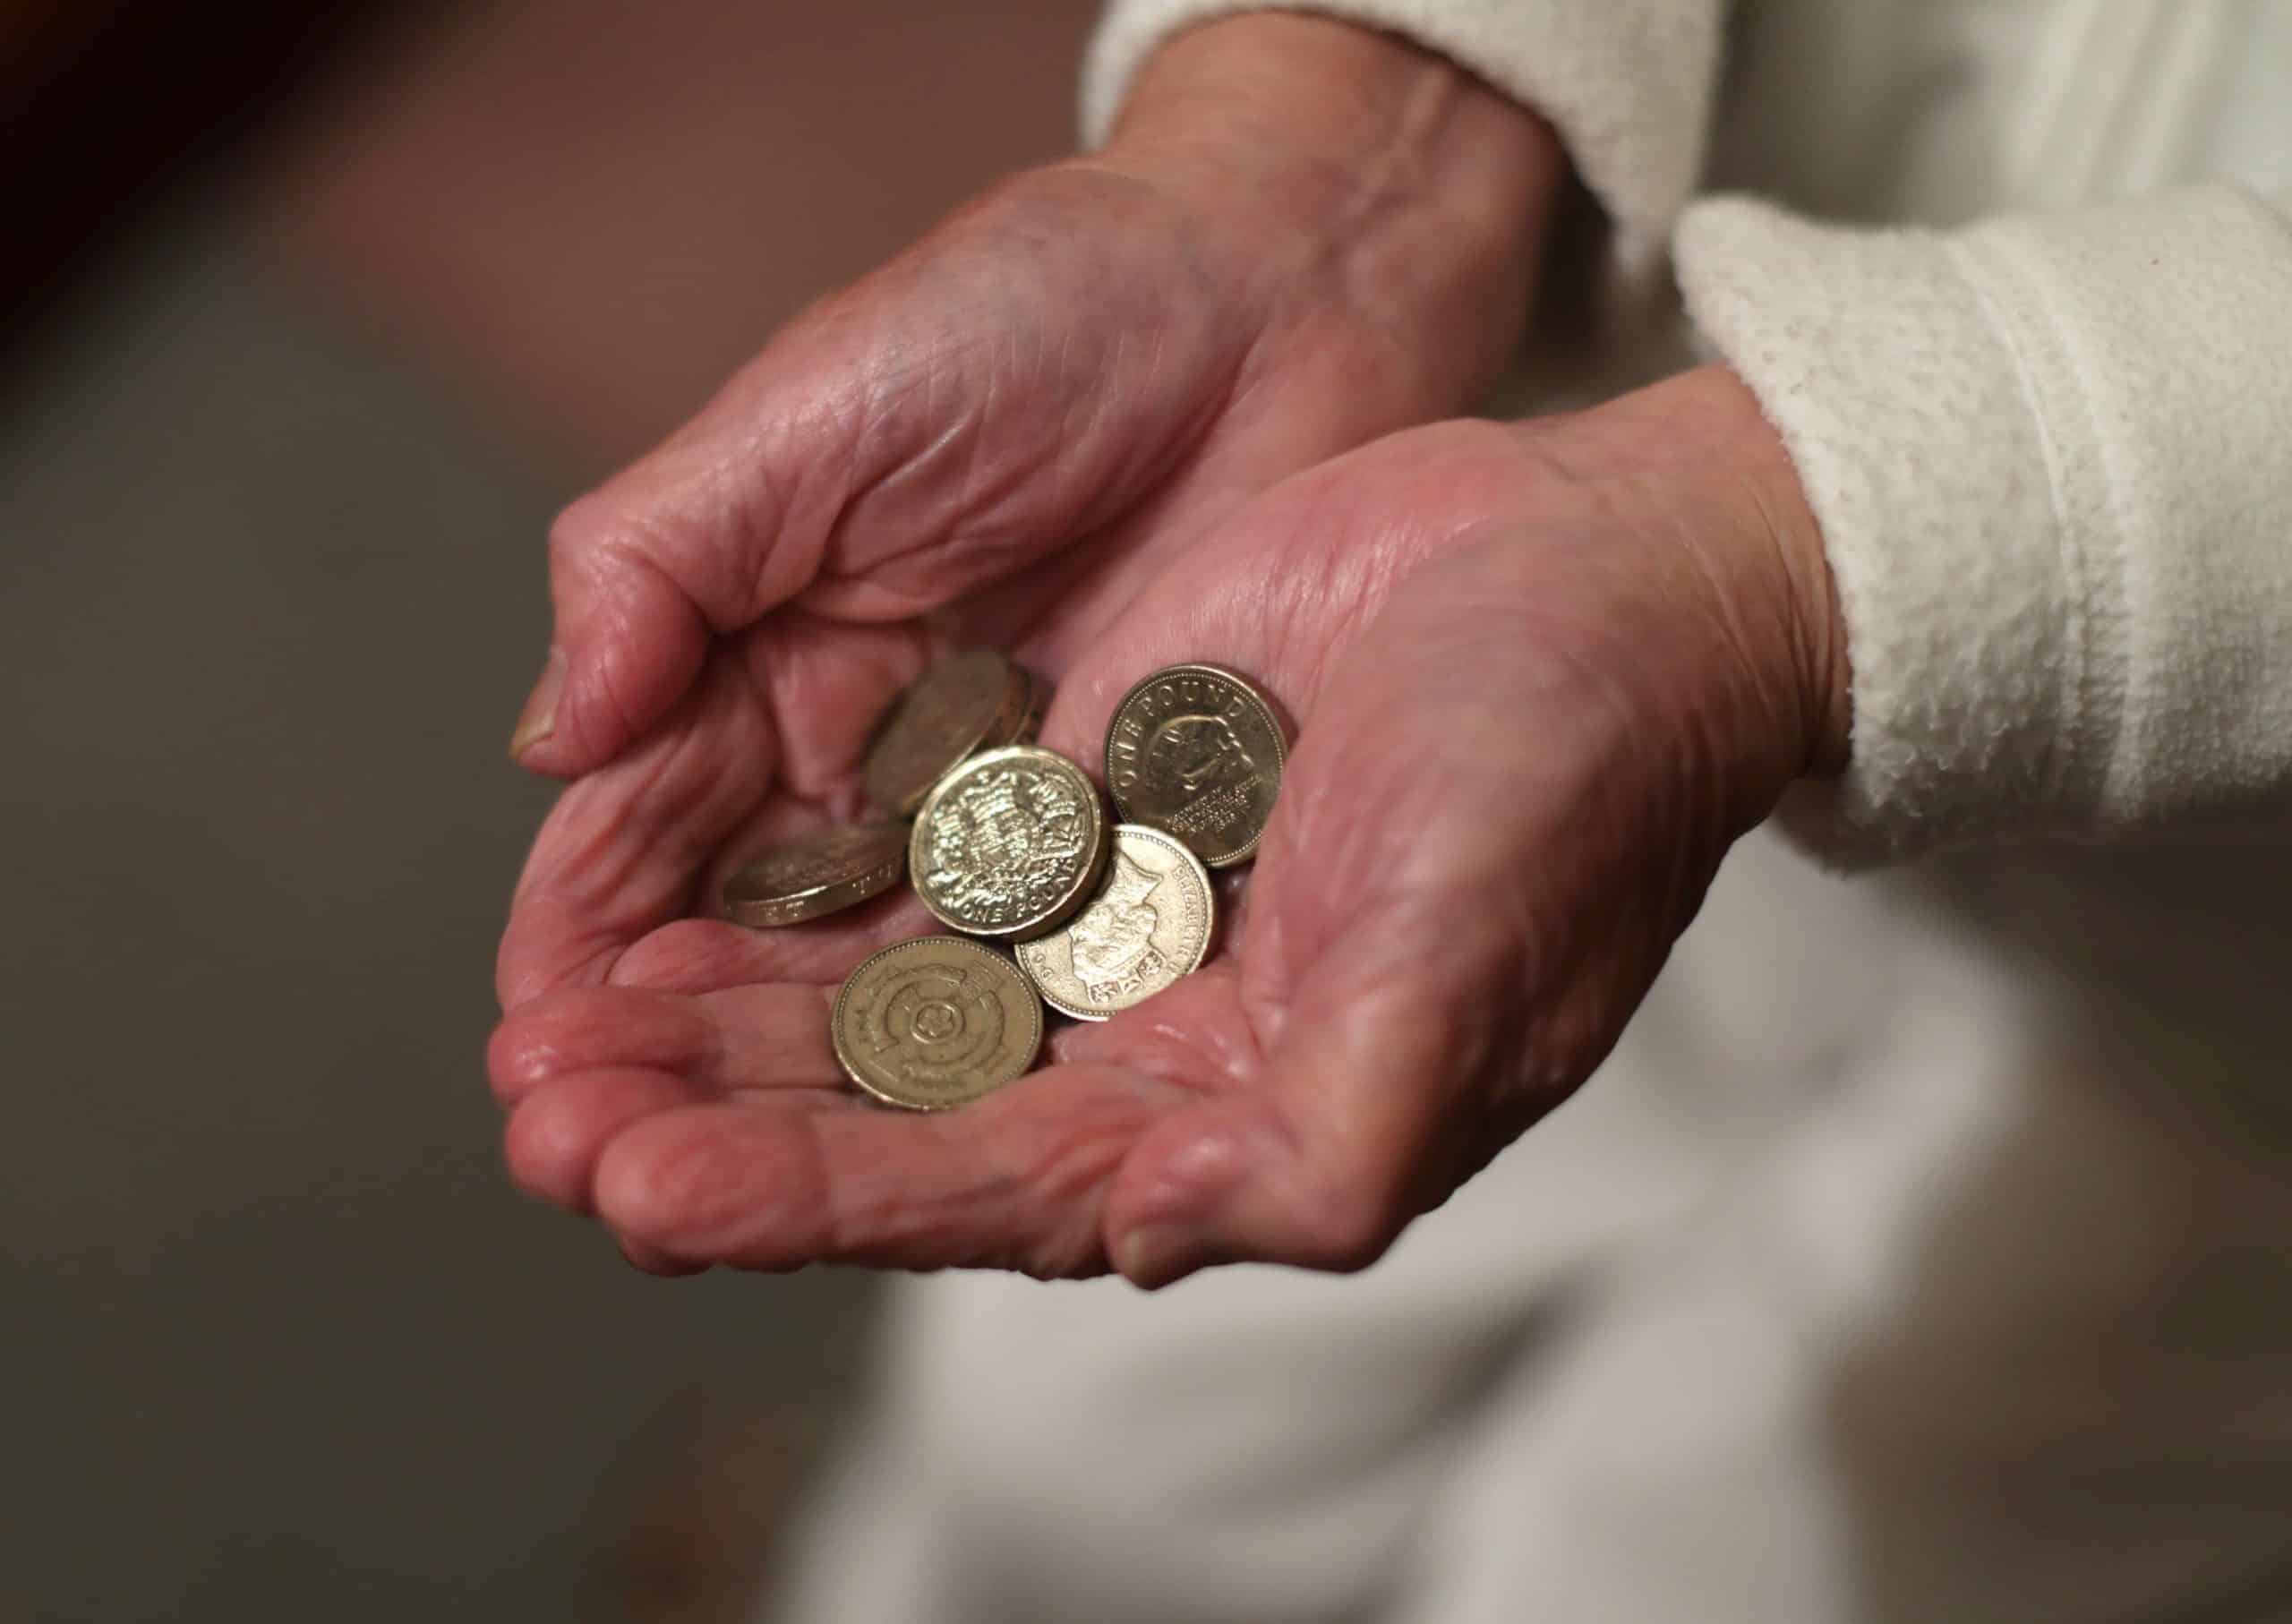 Retirement age could be raised to ease public debt, OECD warns